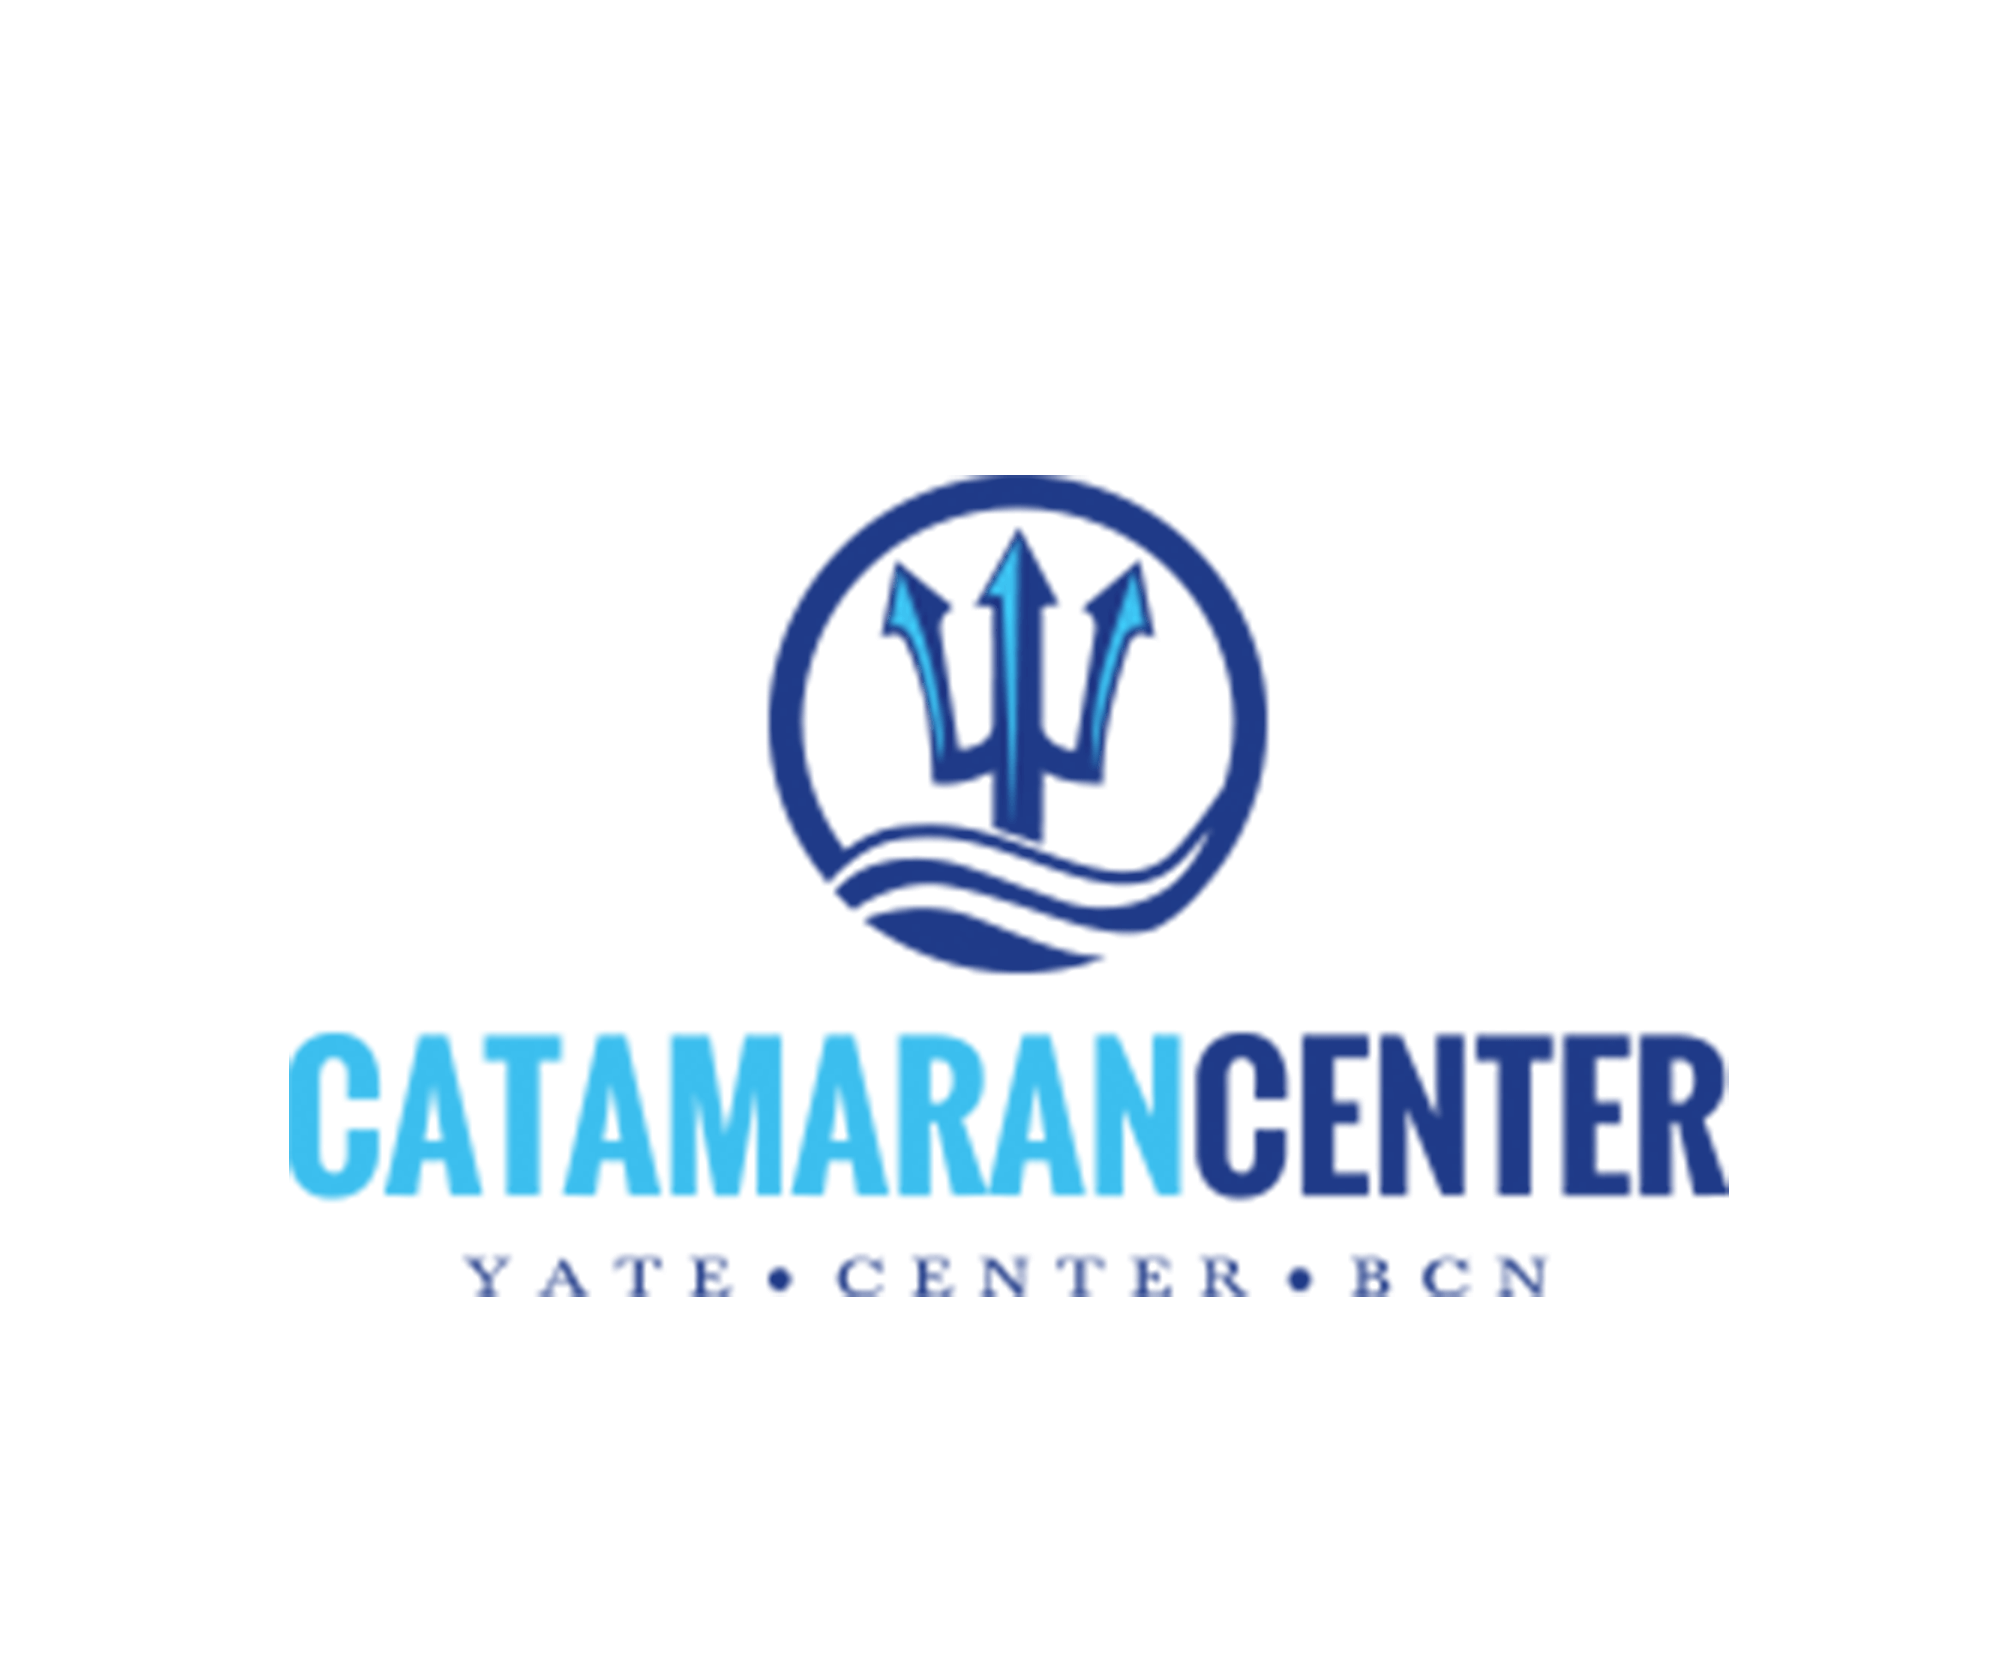 Located in Spain, Catamaran Center collaborates with Multicats International.